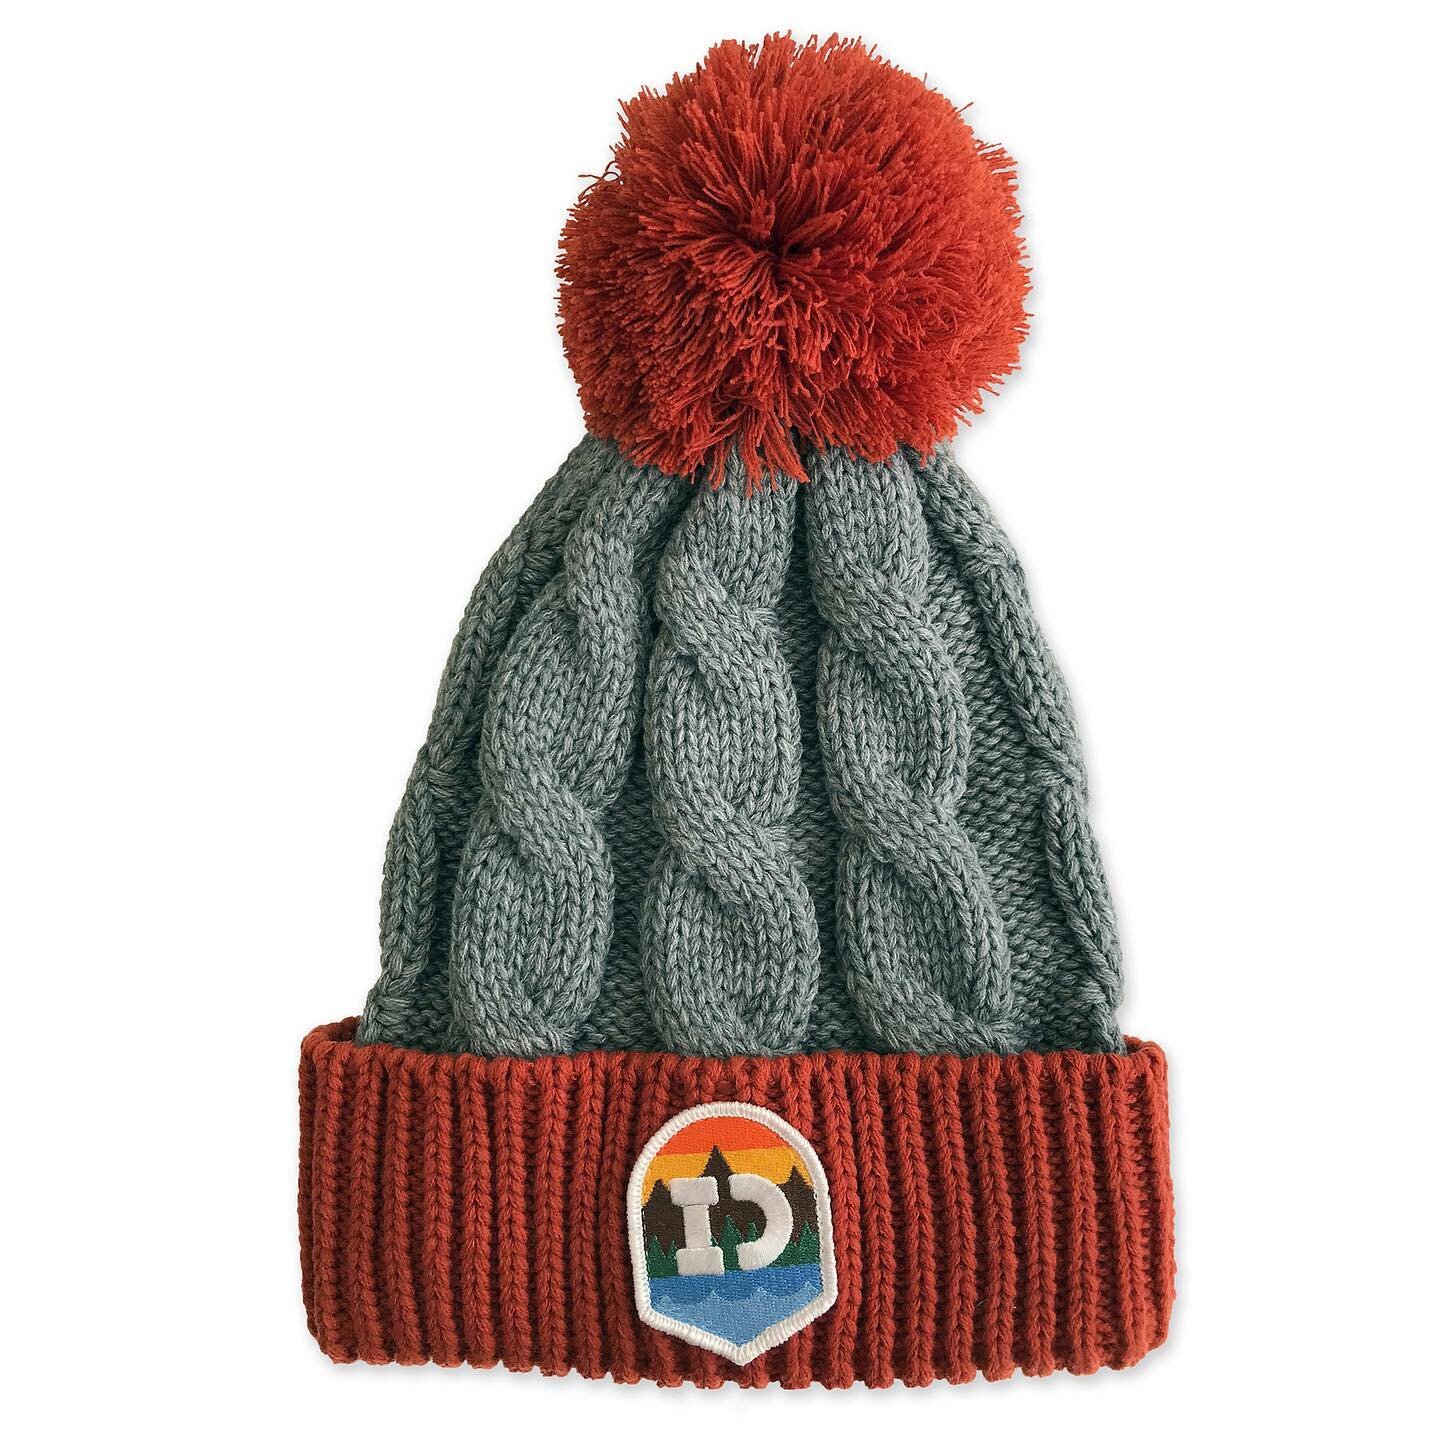 Don&rsquo;t forget the warm hats! Plenty in stock now. Link in profile. 

#boise #idaho #halfbasquejob #hat #patch #badge #winterhat #beanie #shopsmall #buylocal #graphicdesign